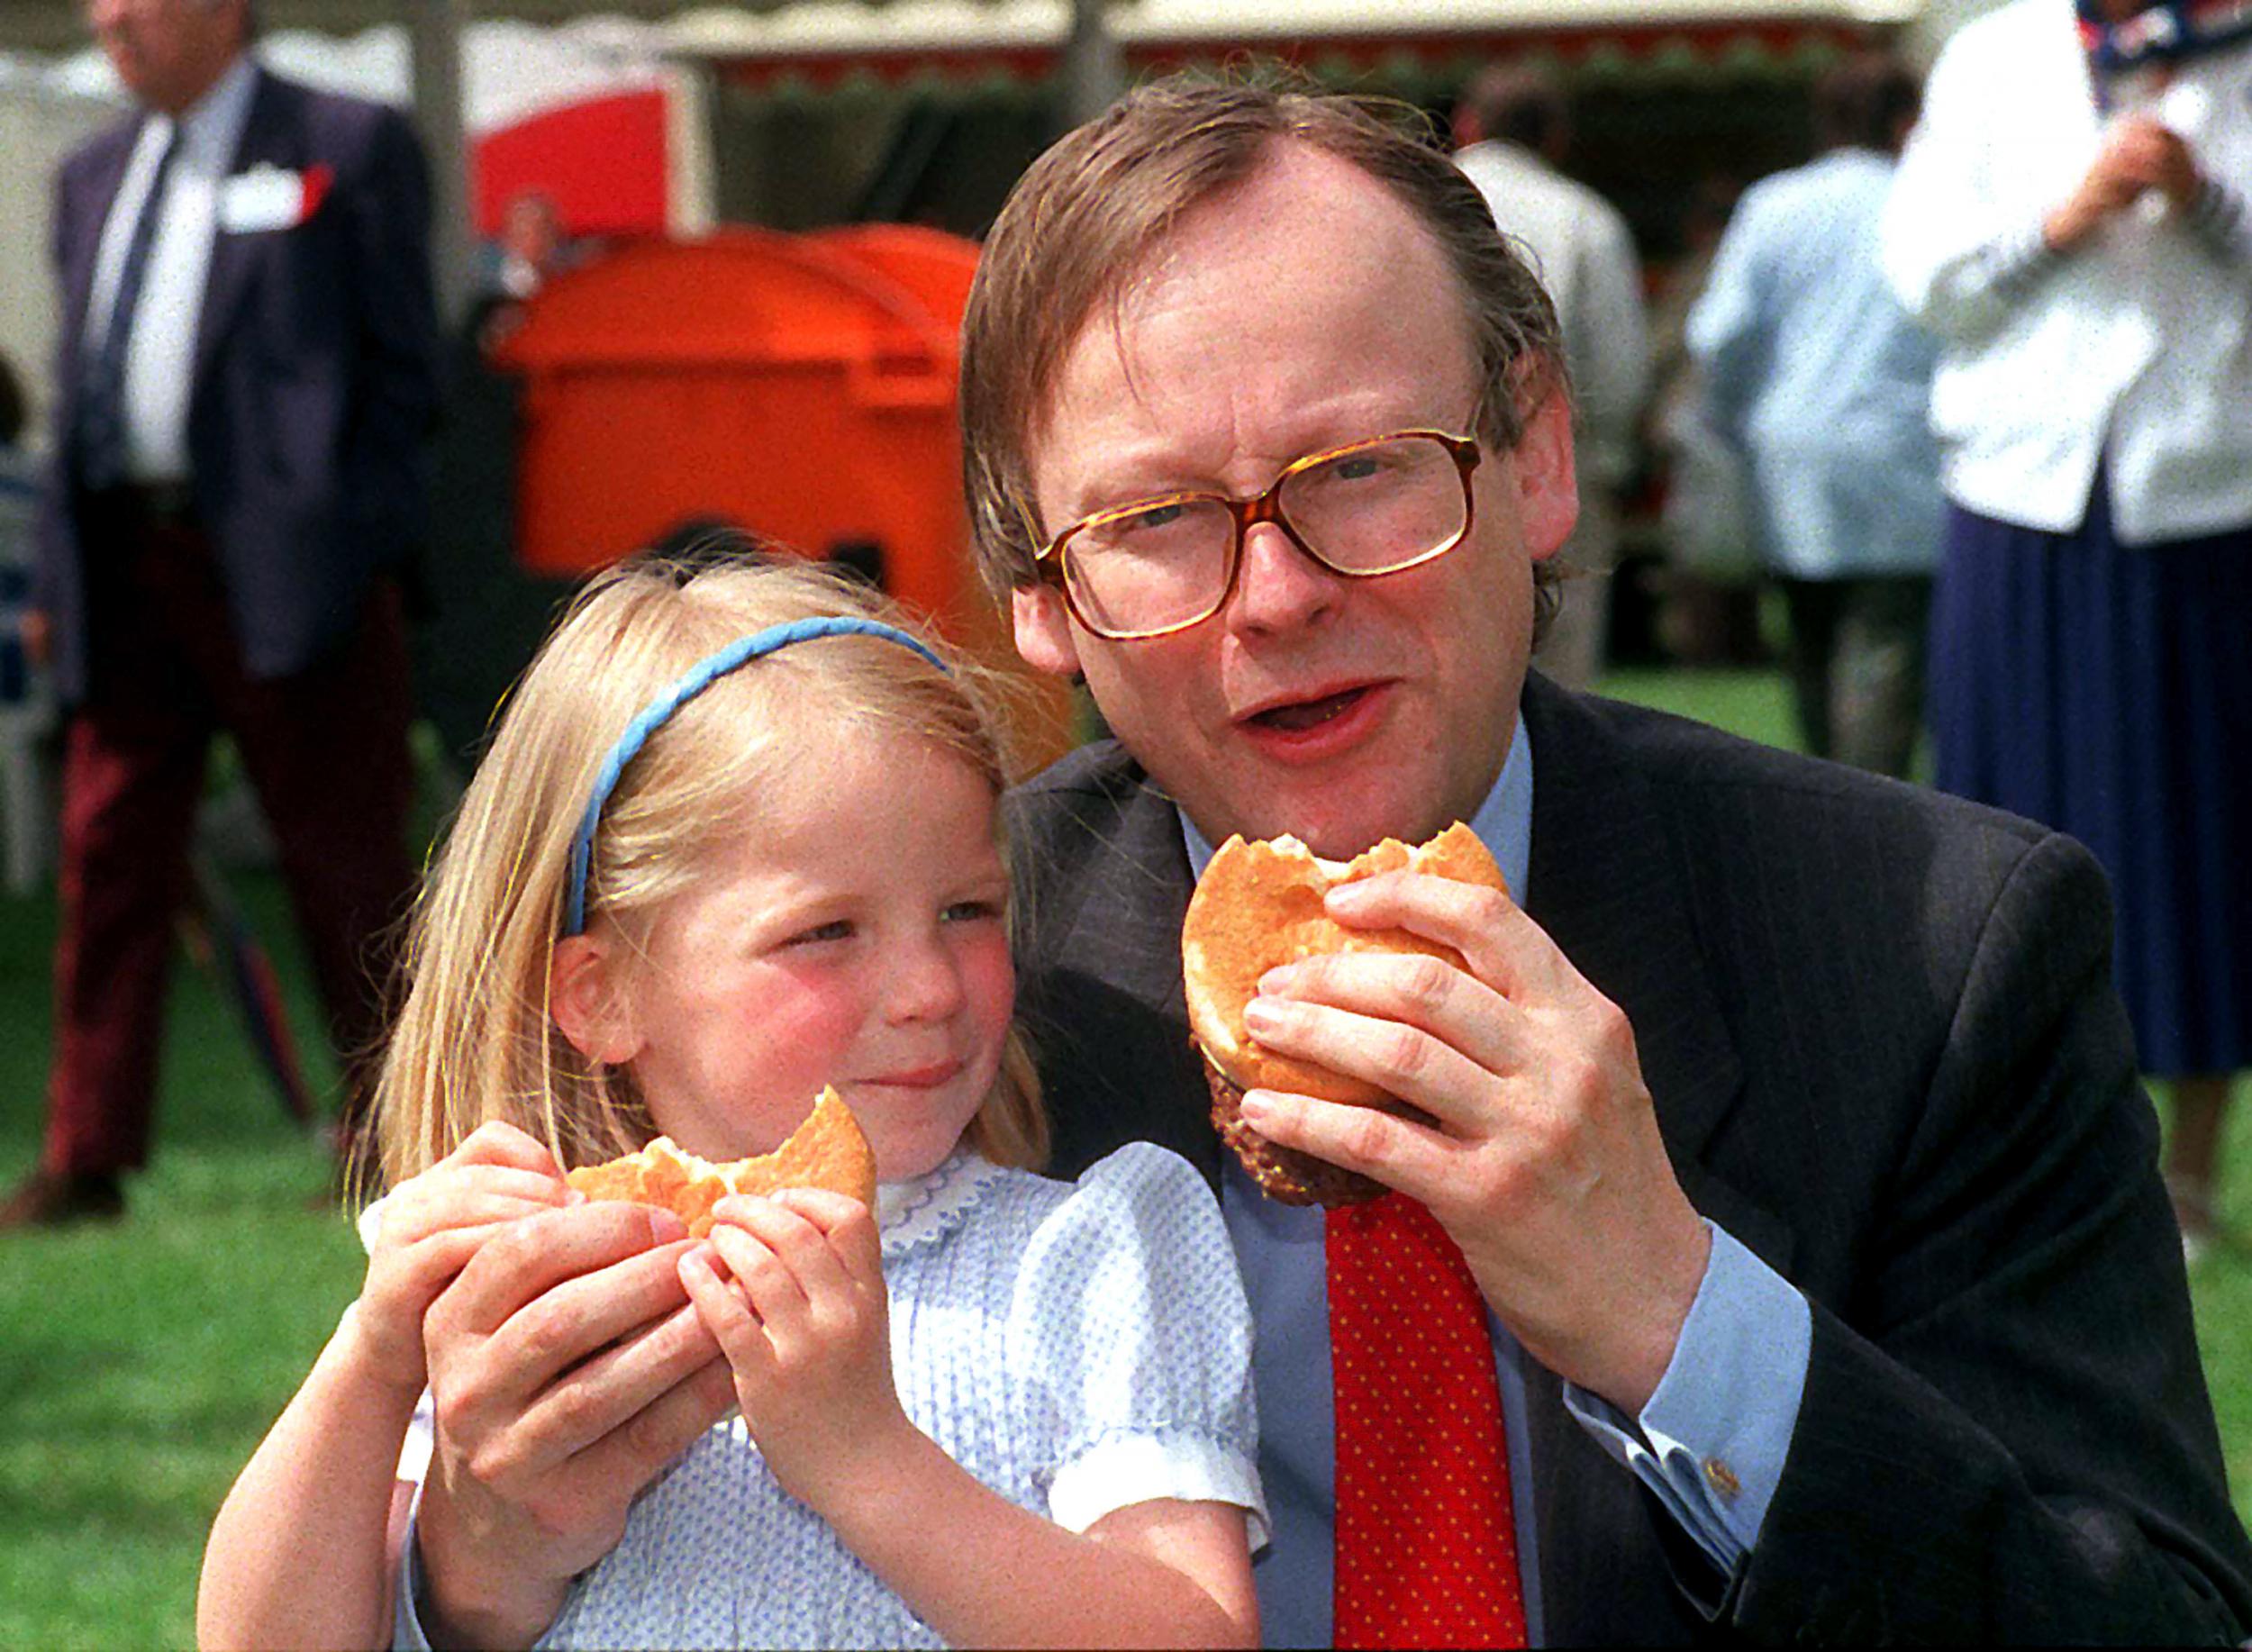 Agriculture minister John Gummer fed his daughter a beefburger in front of the press, in May 1990, to show there was nothing to fear from mad cow disease